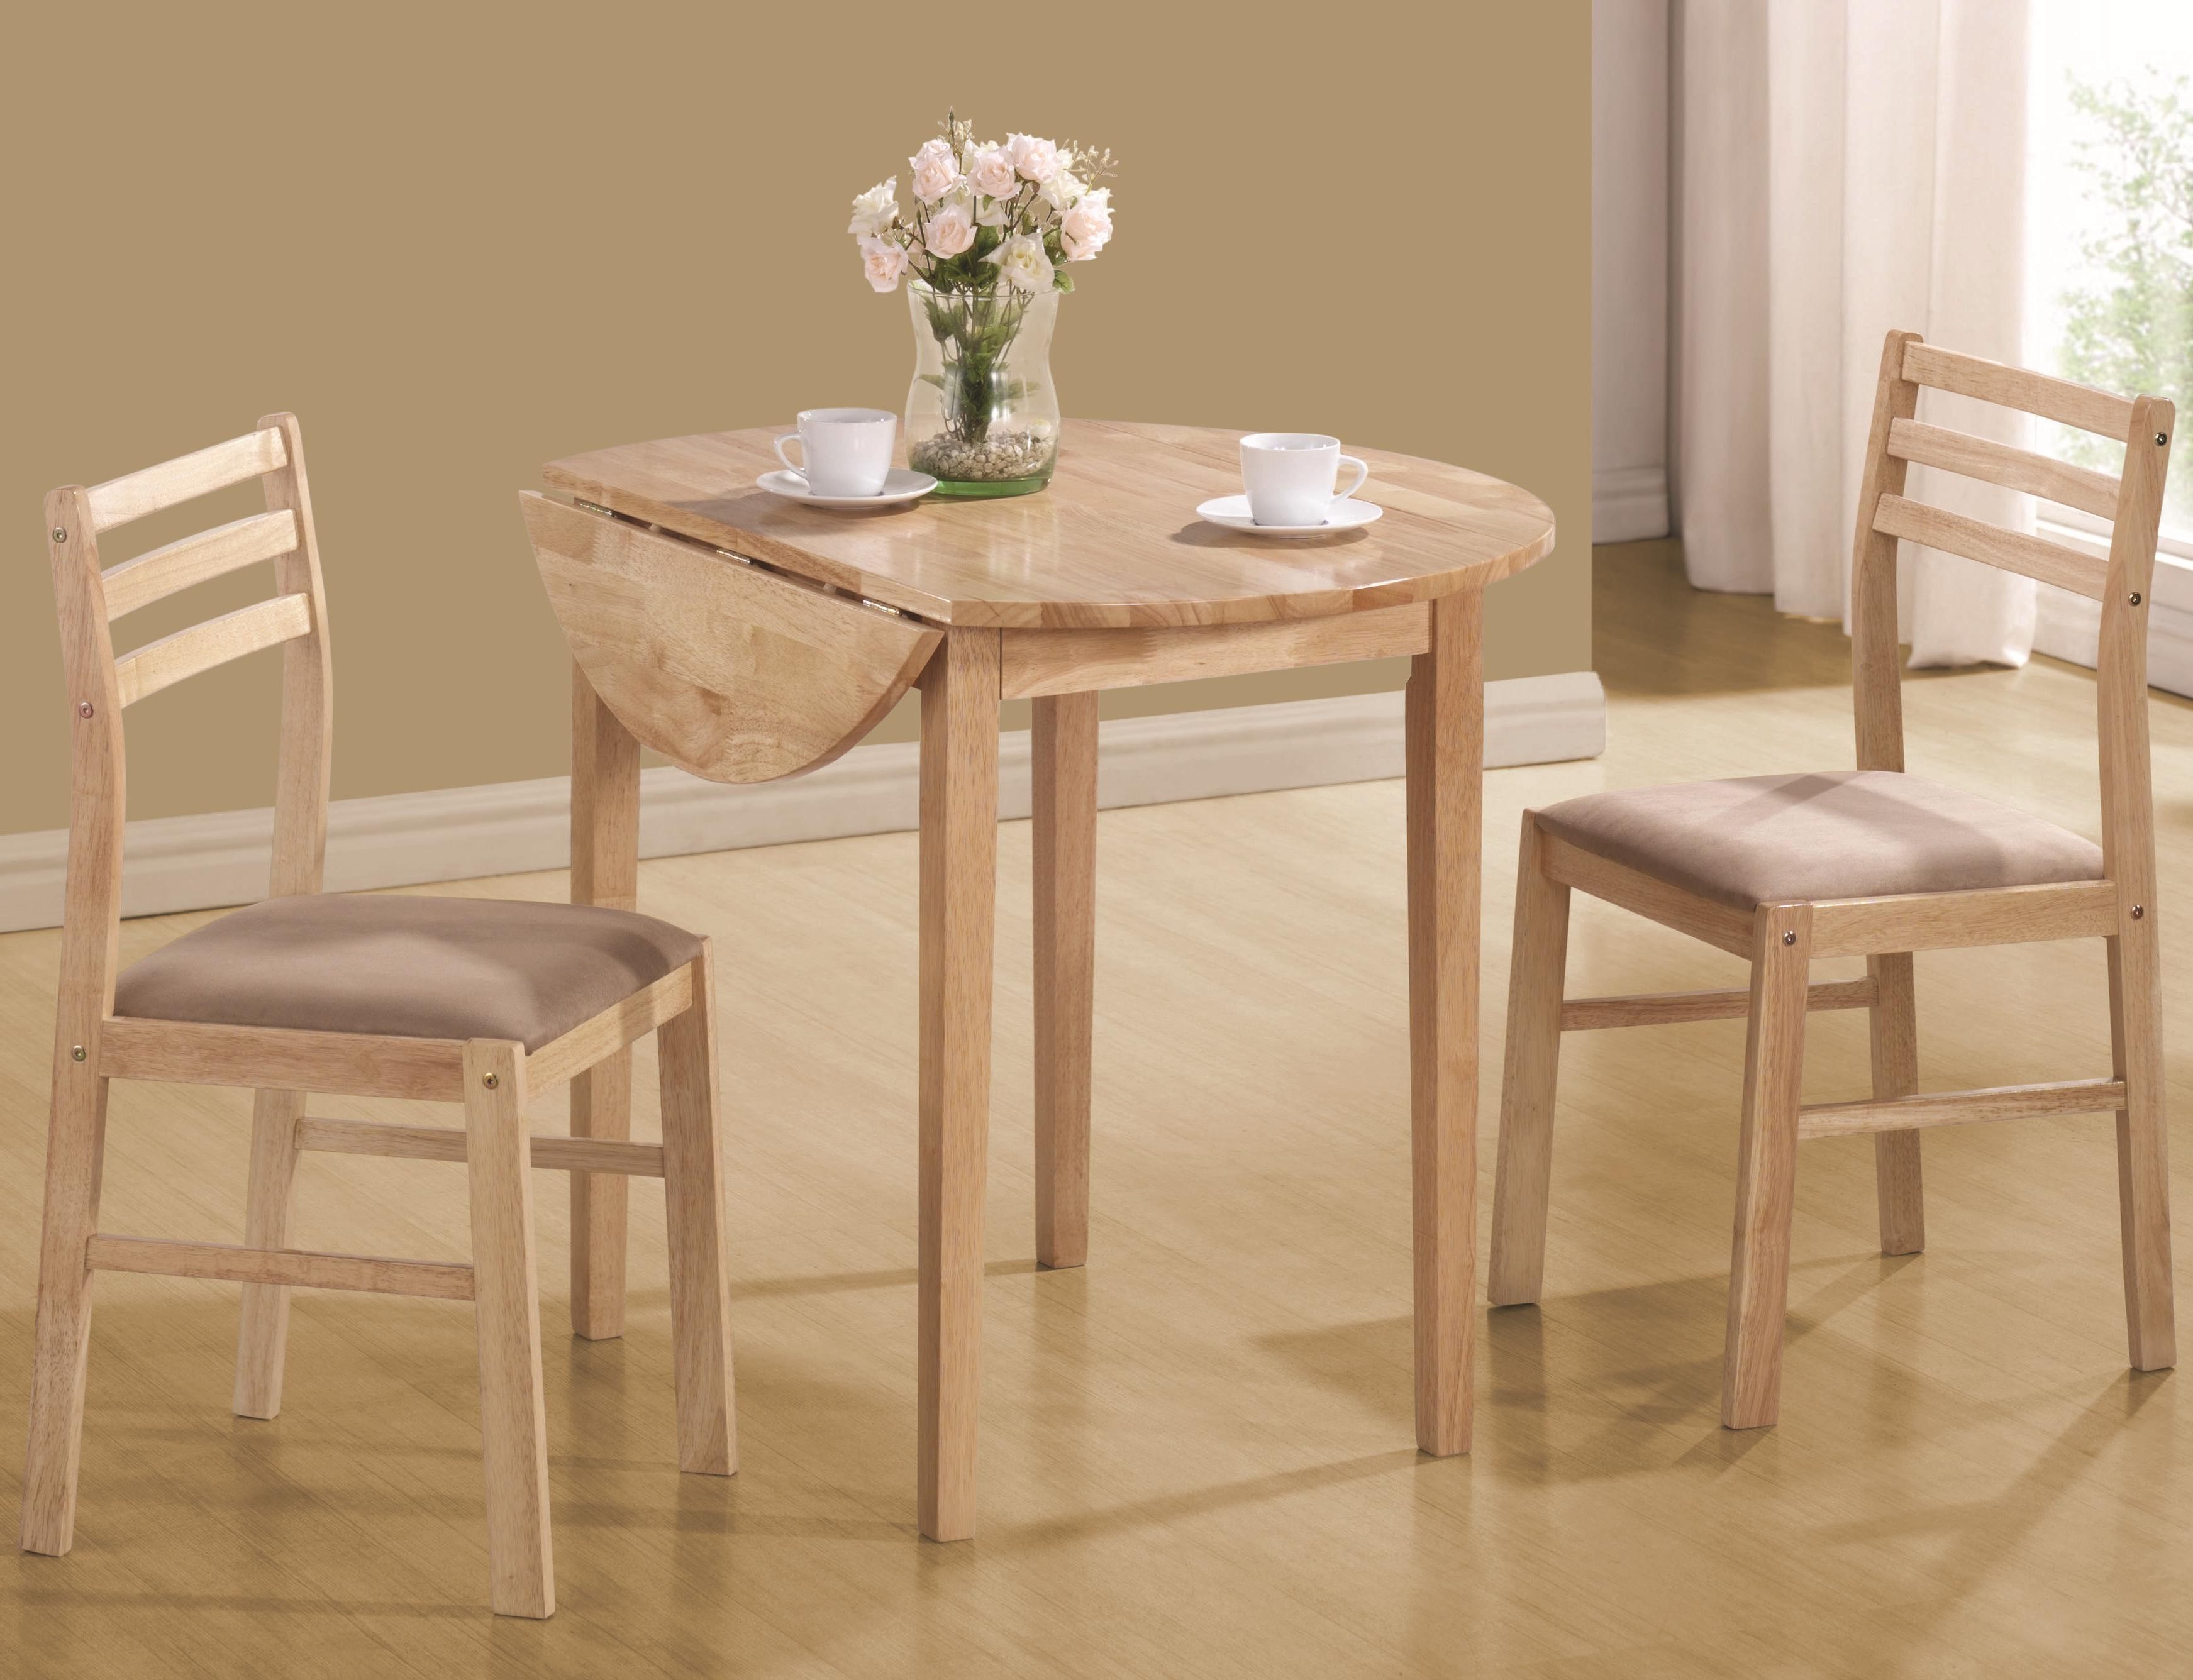 Fashionable 3 Piece Dining Sets Pertaining To Dinettes Casual 3 Piece Table & Chair Setcoaster At Value City Furniture (View 18 of 20)